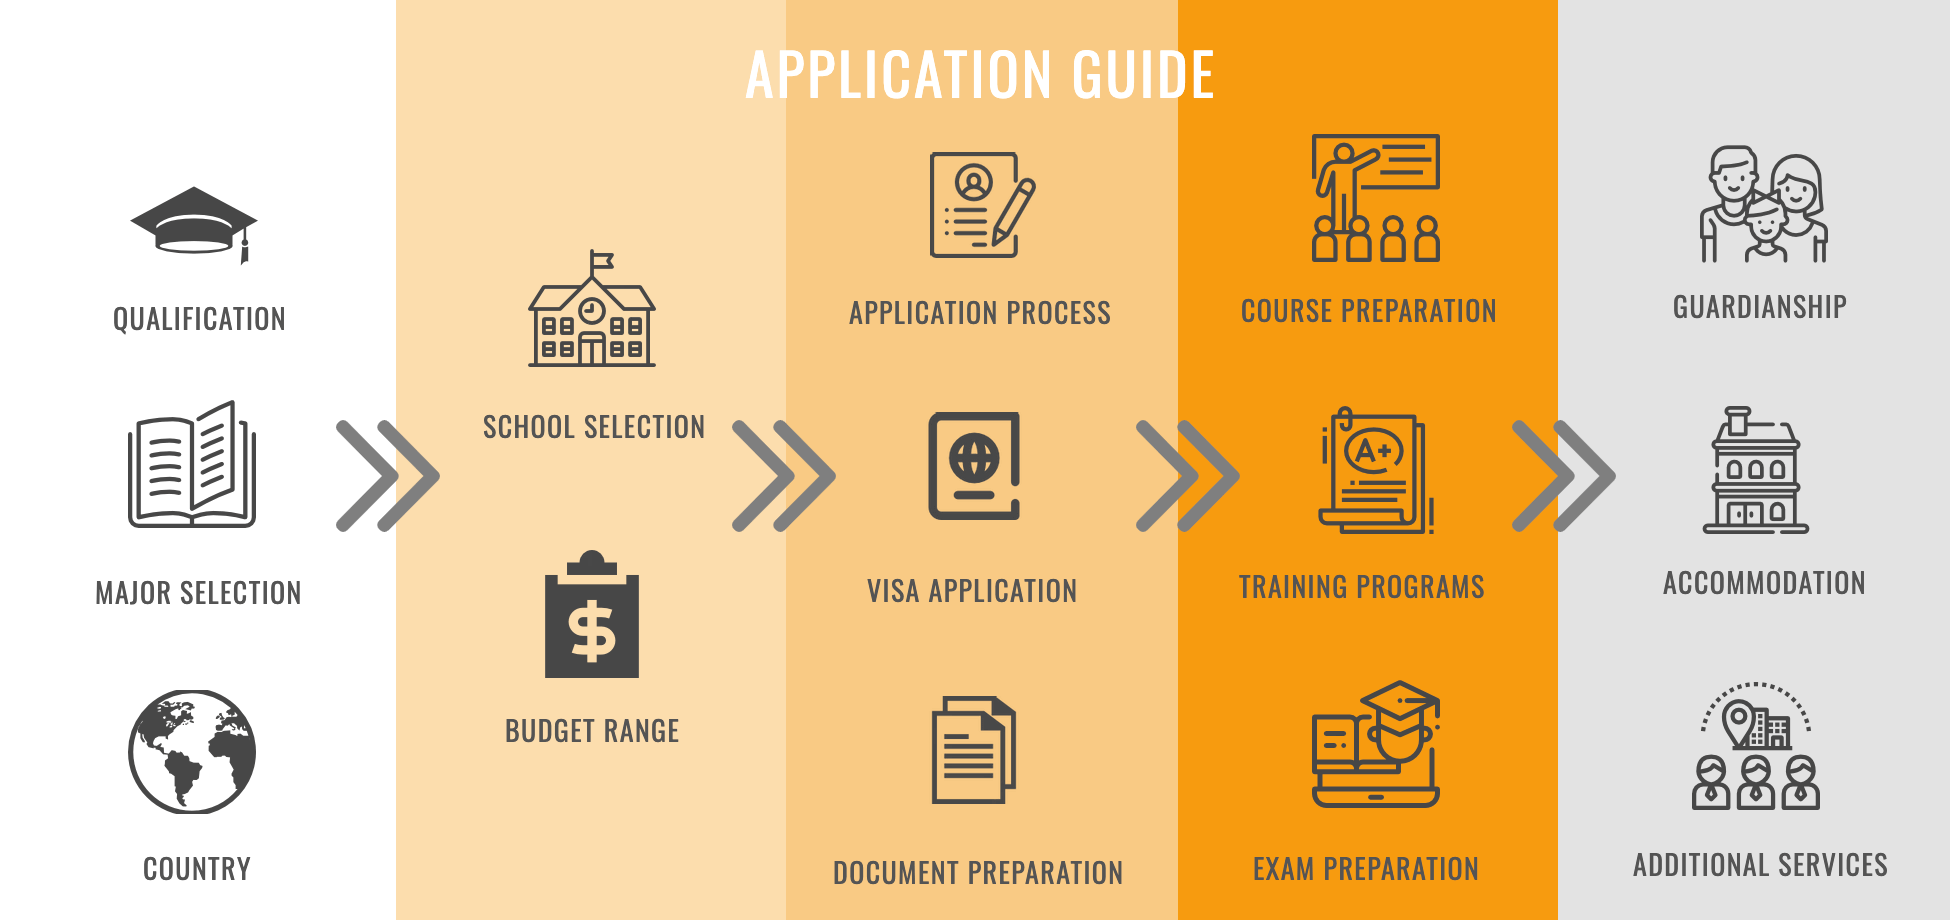 Application guide 7